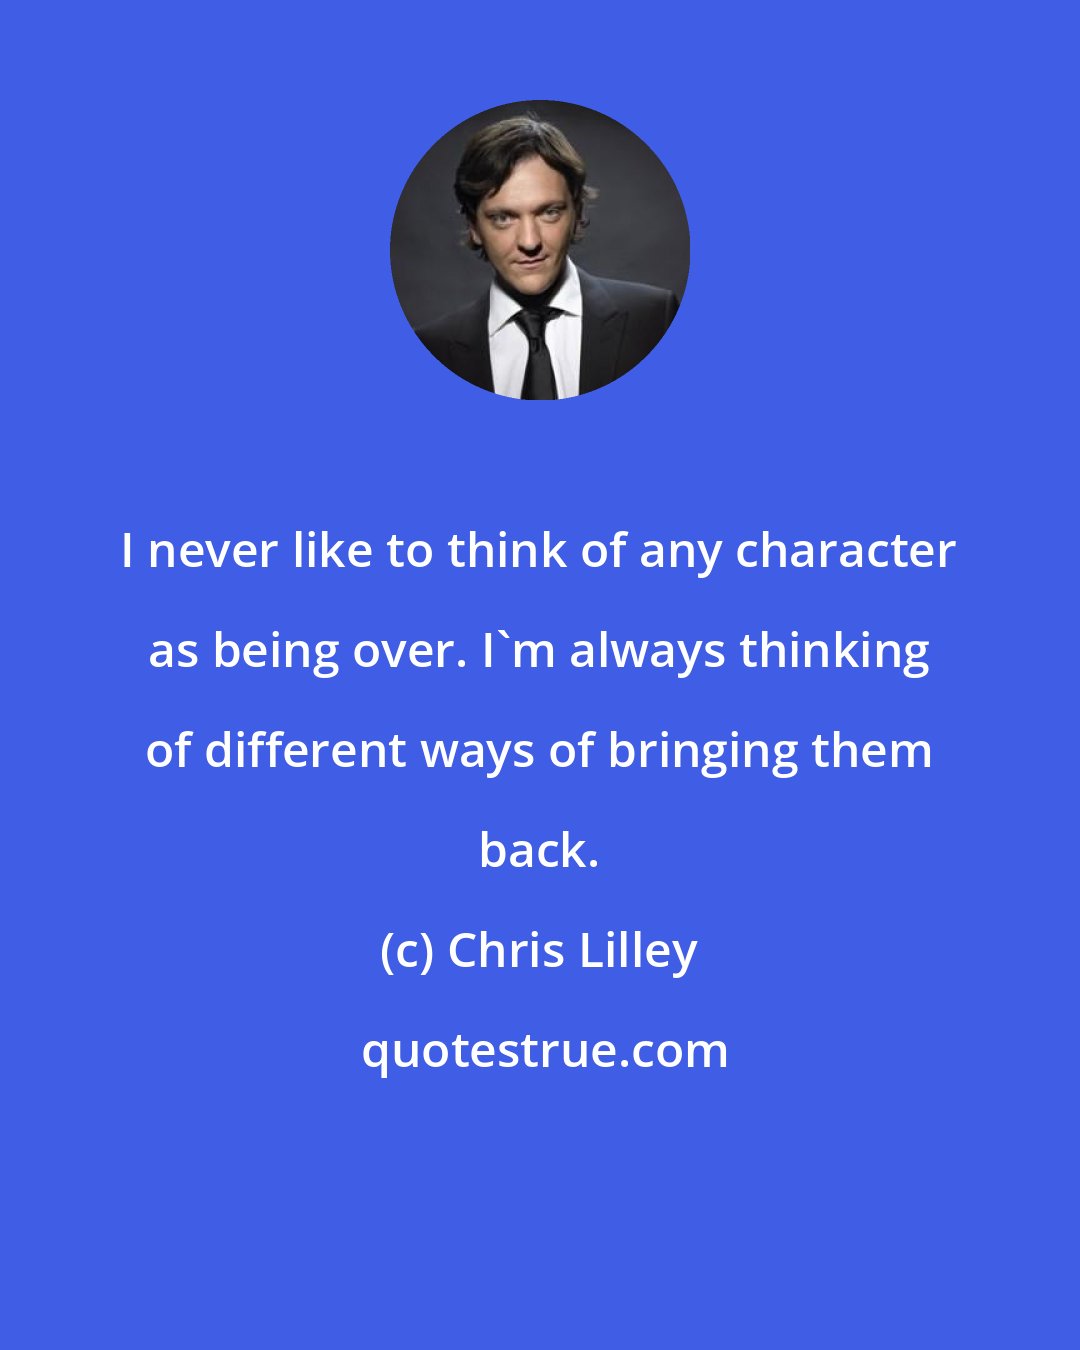 Chris Lilley: I never like to think of any character as being over. I'm always thinking of different ways of bringing them back.